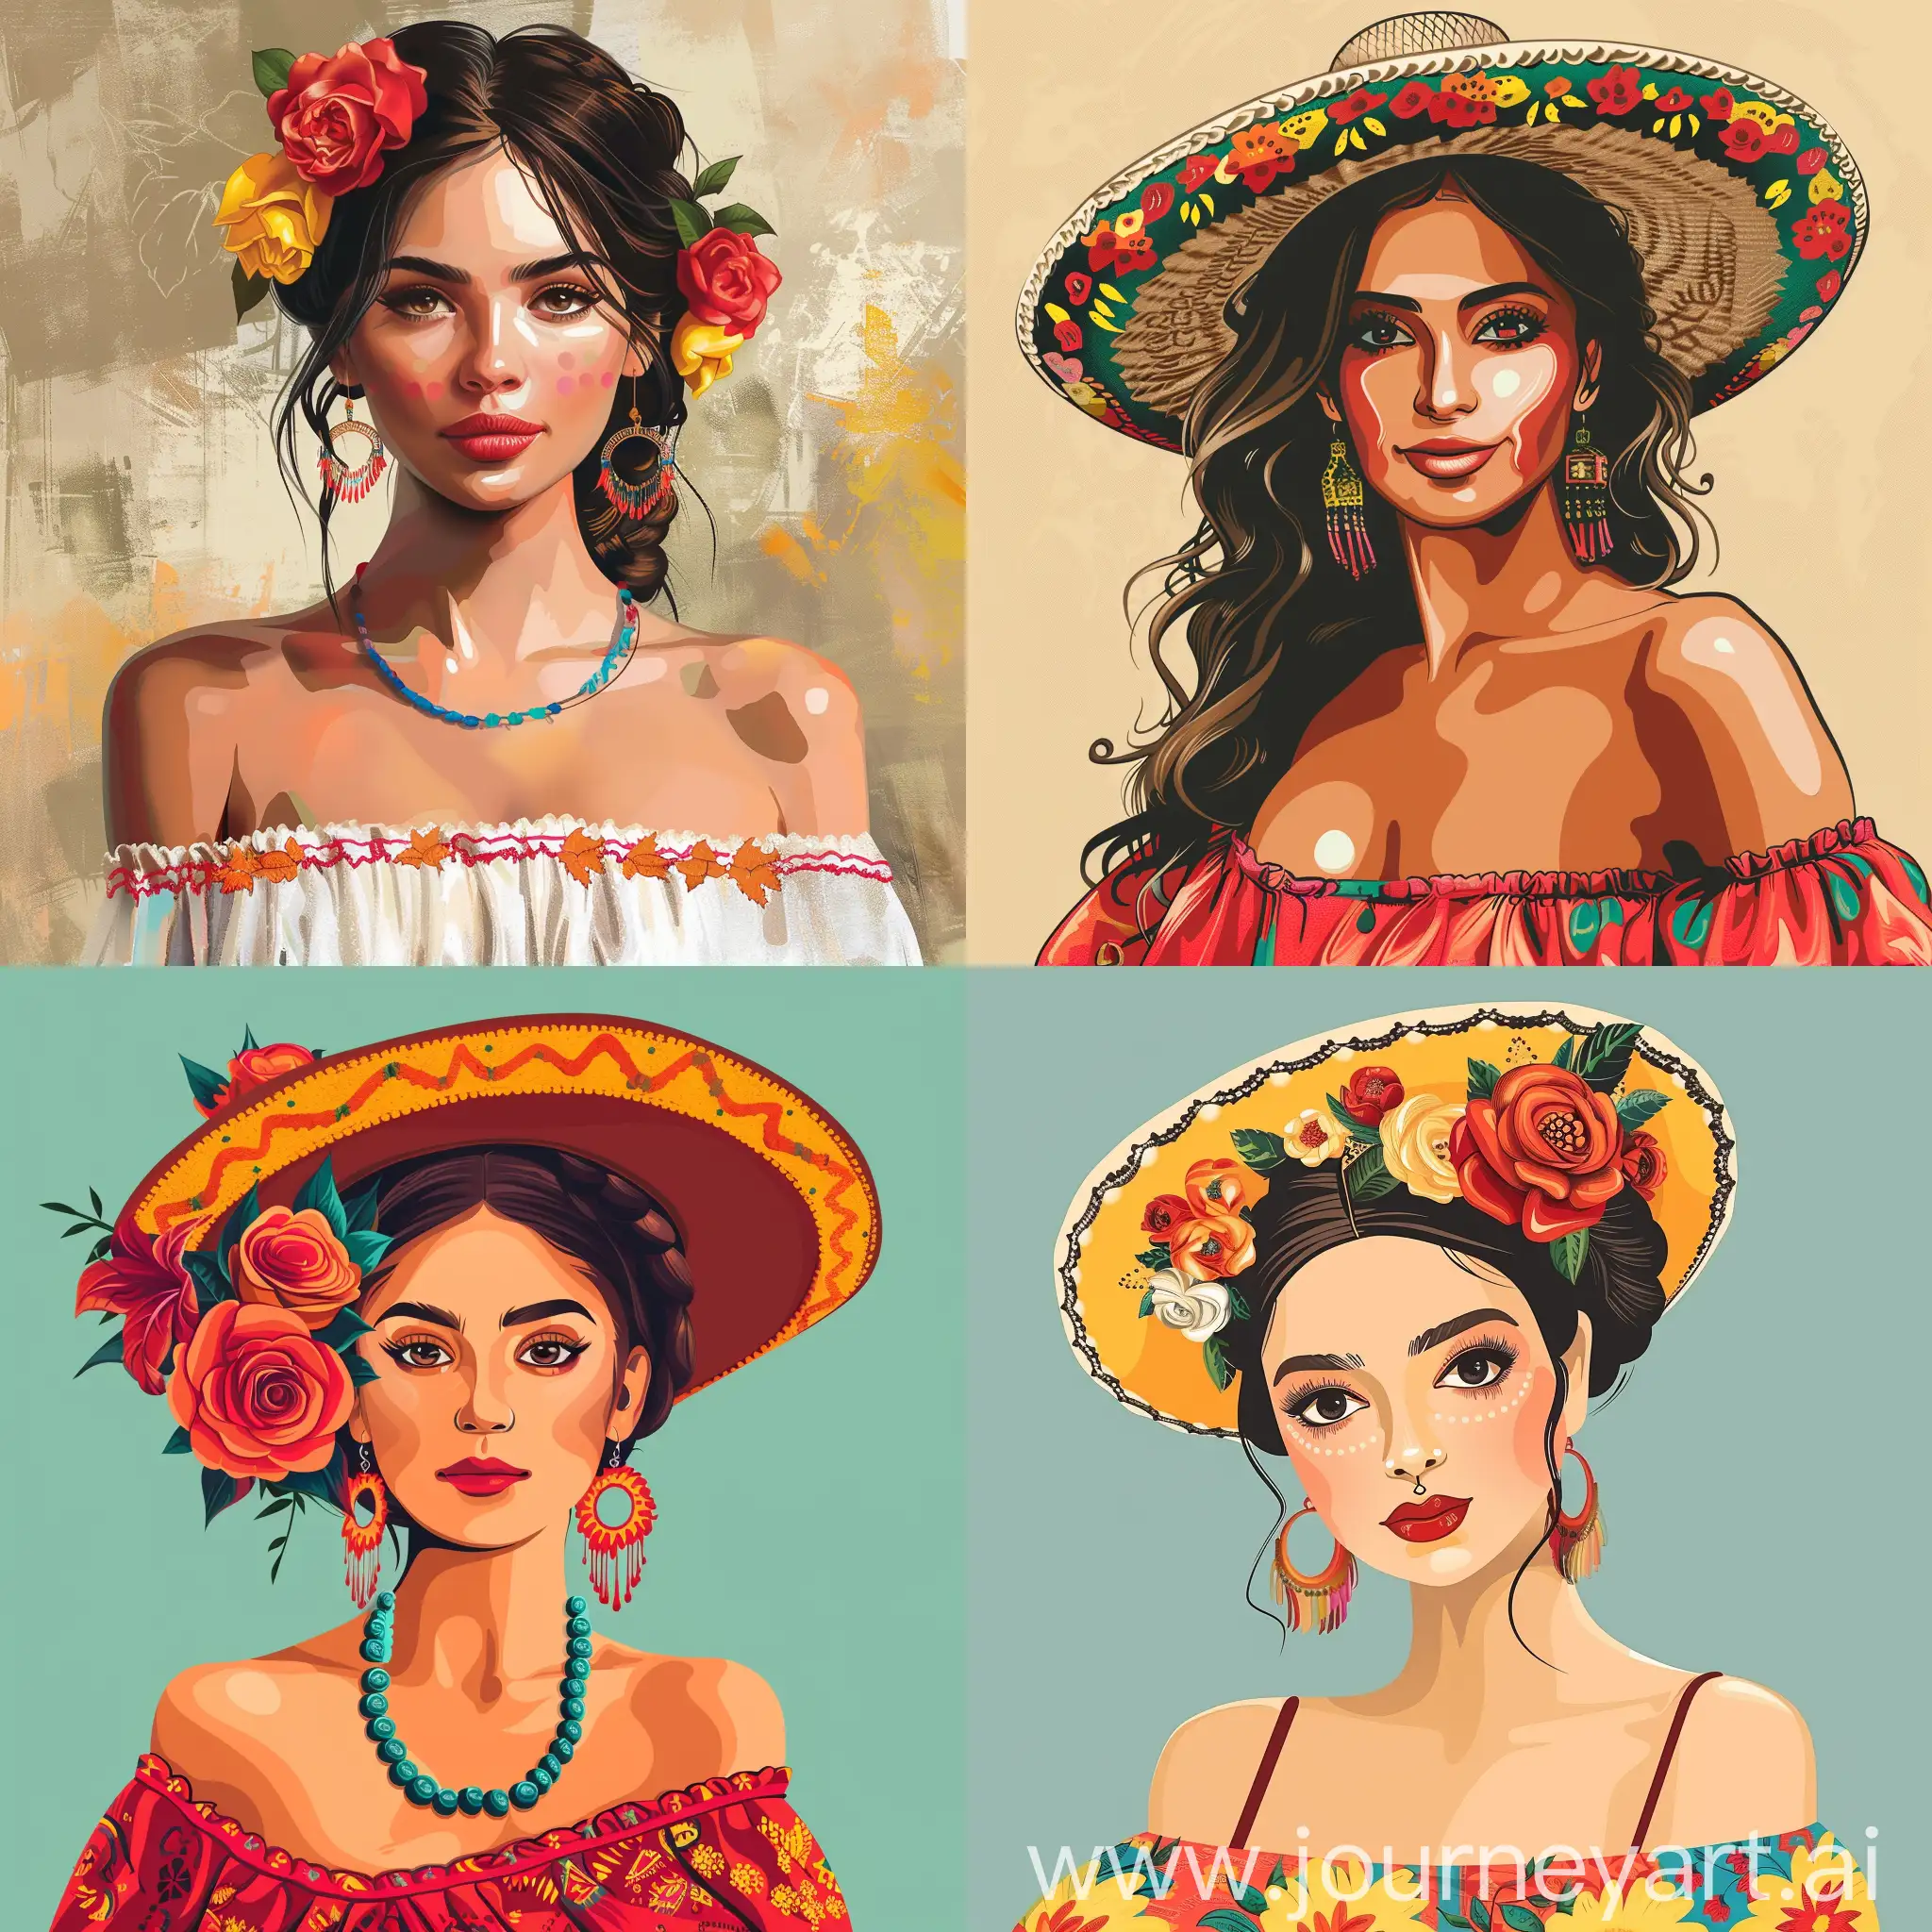 A beautiful Mexican woman, illustration